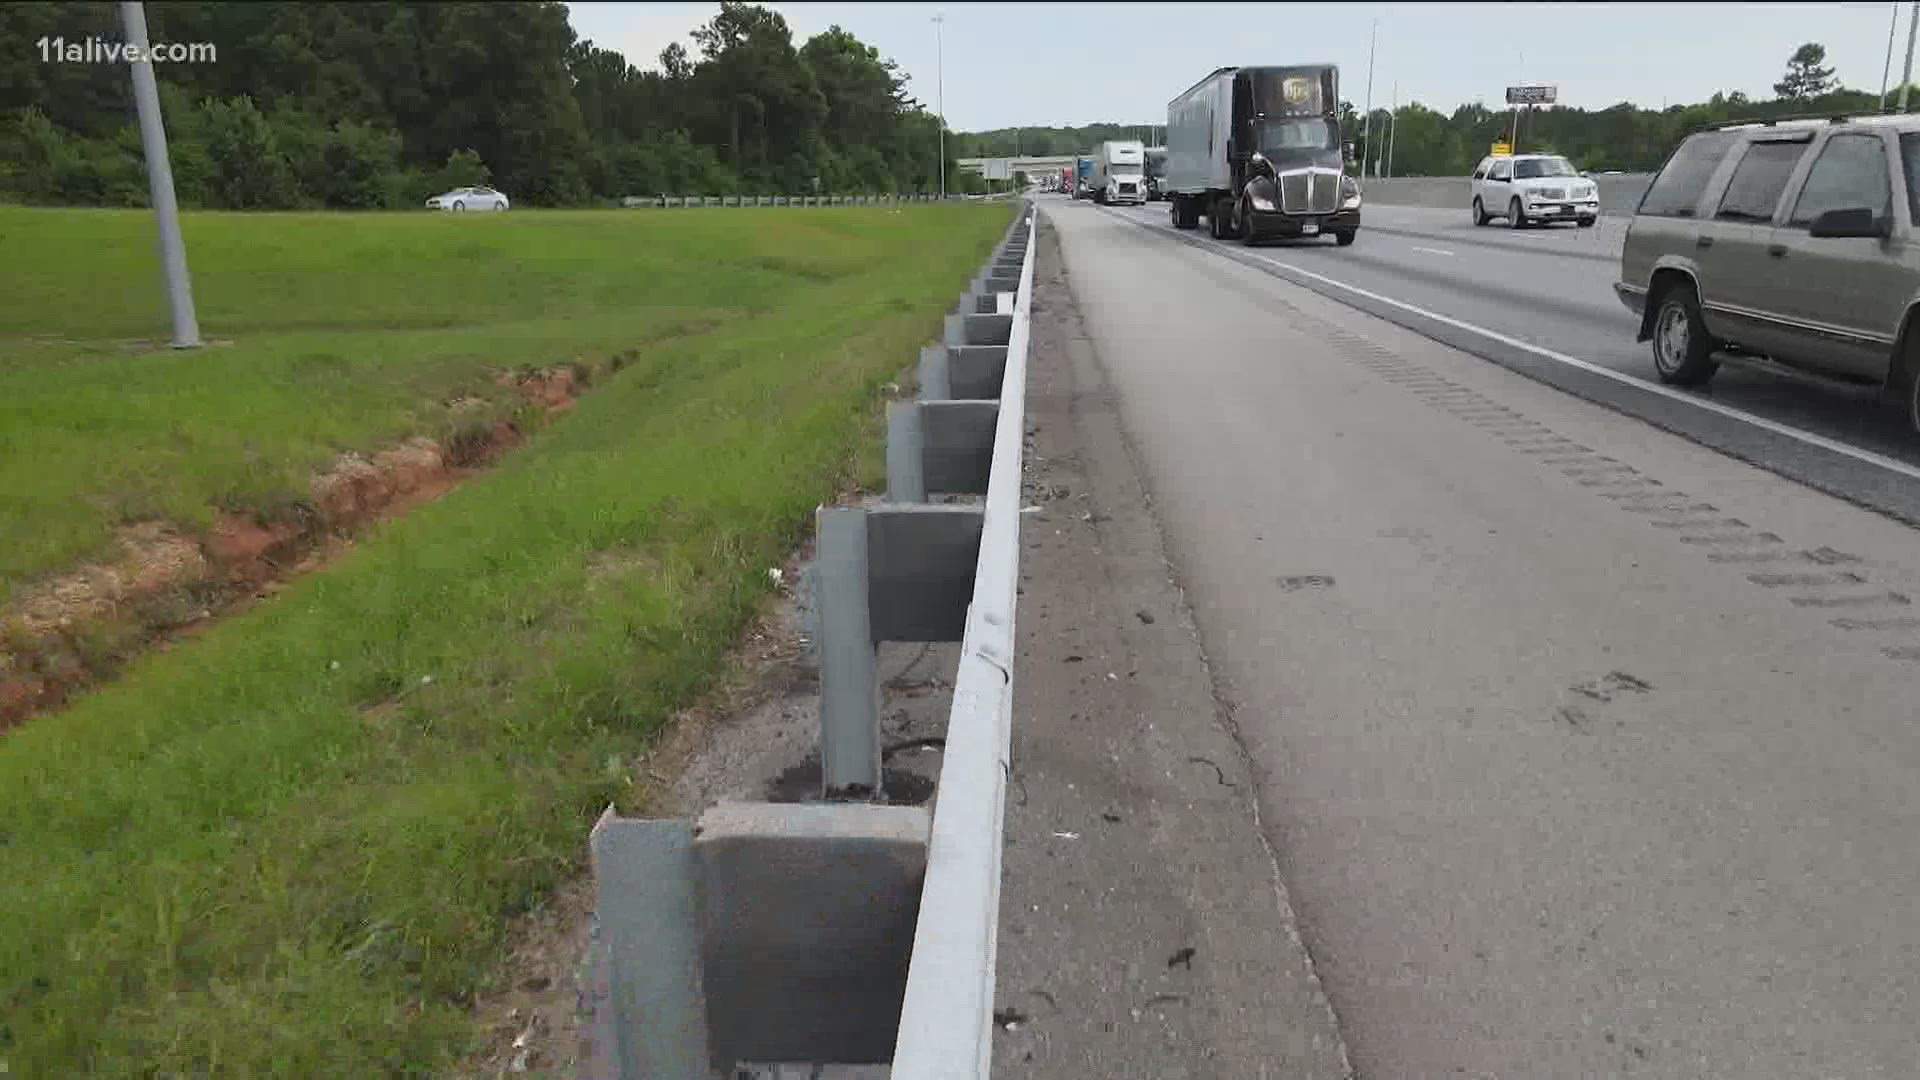 Multiple lawsuits have been filed across the country claiming wrongful deaths allegedly caused by X-Lite guardrails. Hundreds remain in Georgia.